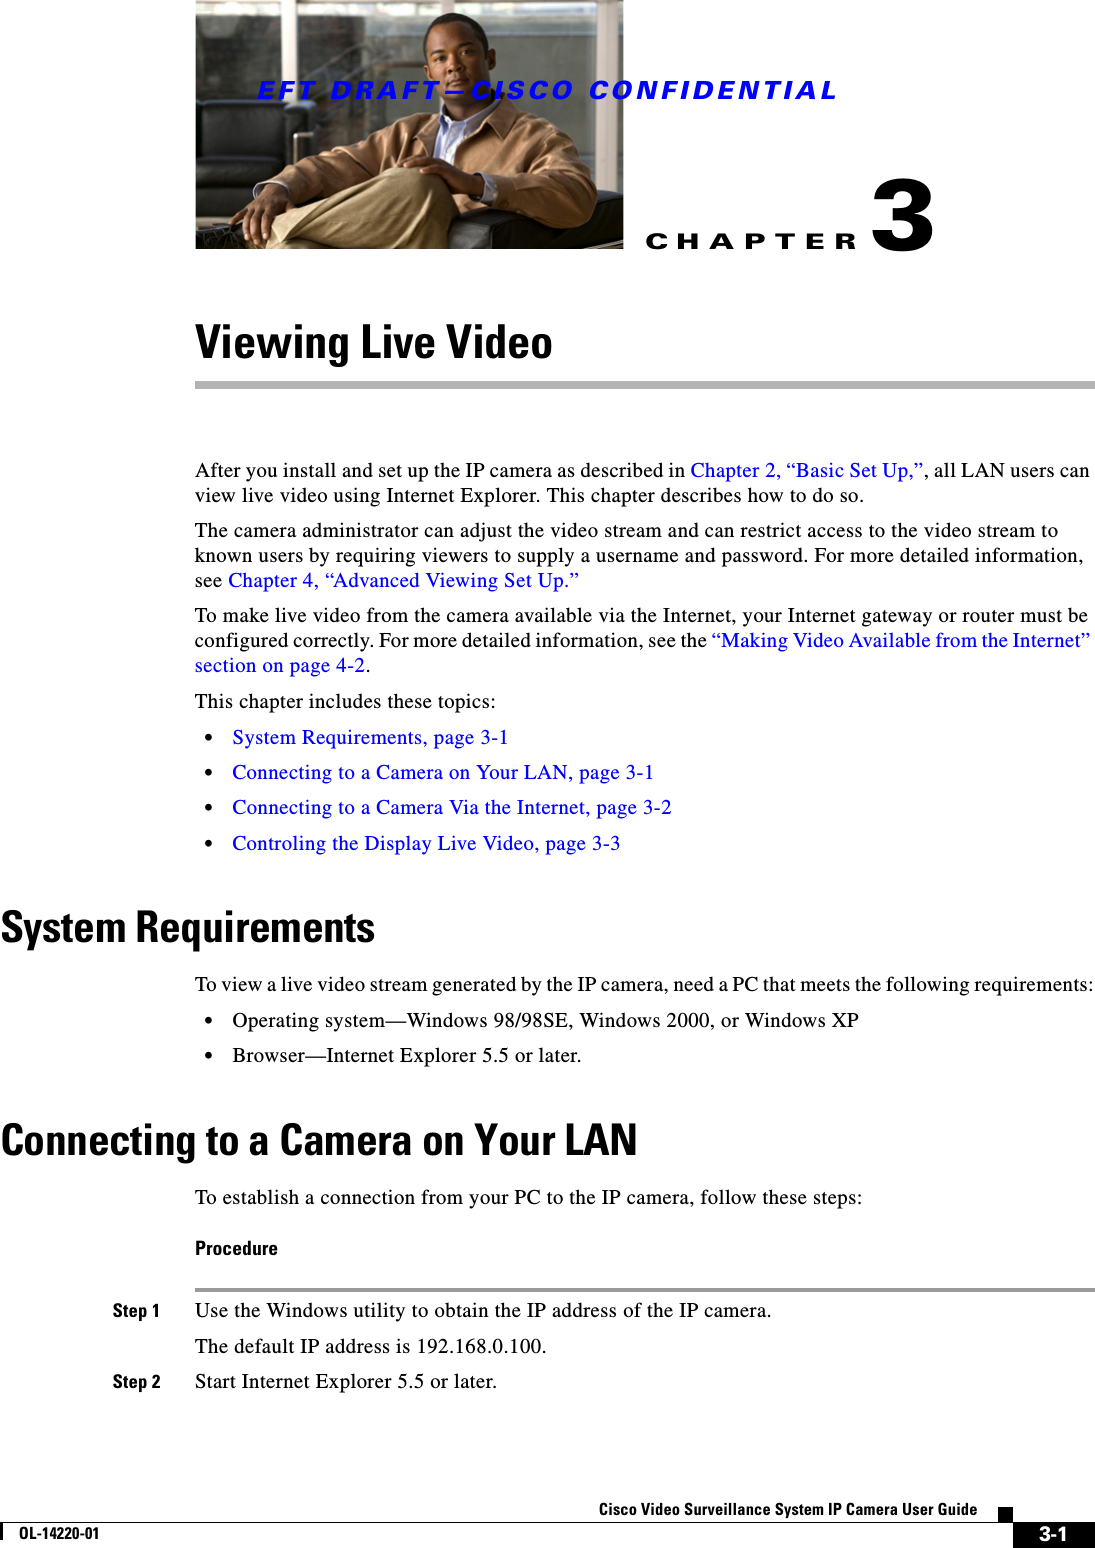 CHAPTEREFT DRAFT—CISCO CONFIDENTIAL3-1Cisco Video Surveillance System IP Camera User GuideOL-14220-013Viewing Live VideoAfter you install and set up the IP camera as described in Chapter 2, “Basic Set Up,”, all LAN users can view live video using Internet Explorer. This chapter describes how to do so.The camera administrator can adjust the video stream and can restrict access to the video stream to known users by requiring viewers to supply a username and password. For more detailed information, see Chapter 4, “Advanced Viewing Set Up.”To make live video from the camera available via the Internet, your Internet gateway or router must be configured correctly. For more detailed information, see the “Making Video Available from the Internet” section on page 4-2.This chapter includes these topics:•System Requirements, page 3-1•Connecting to a Camera on Your LAN, page 3-1•Connecting to a Camera Via the Internet, page 3-2•Controling the Display Live Video, page 3-3System RequirementsTo view a live video stream generated by the IP camera, need a PC that meets the following requirements:•Operating system—Windows 98/98SE, Windows 2000, or Windows XP•Browser—Internet Explorer 5.5 or later.Connecting to a Camera on Your LANTo establish a connection from your PC to the IP camera, follow these steps:ProcedureStep 1 Use the Windows utility to obtain the IP address of the IP camera.The default IP address is 192.168.0.100.Step 2 Start Internet Explorer 5.5 or later.